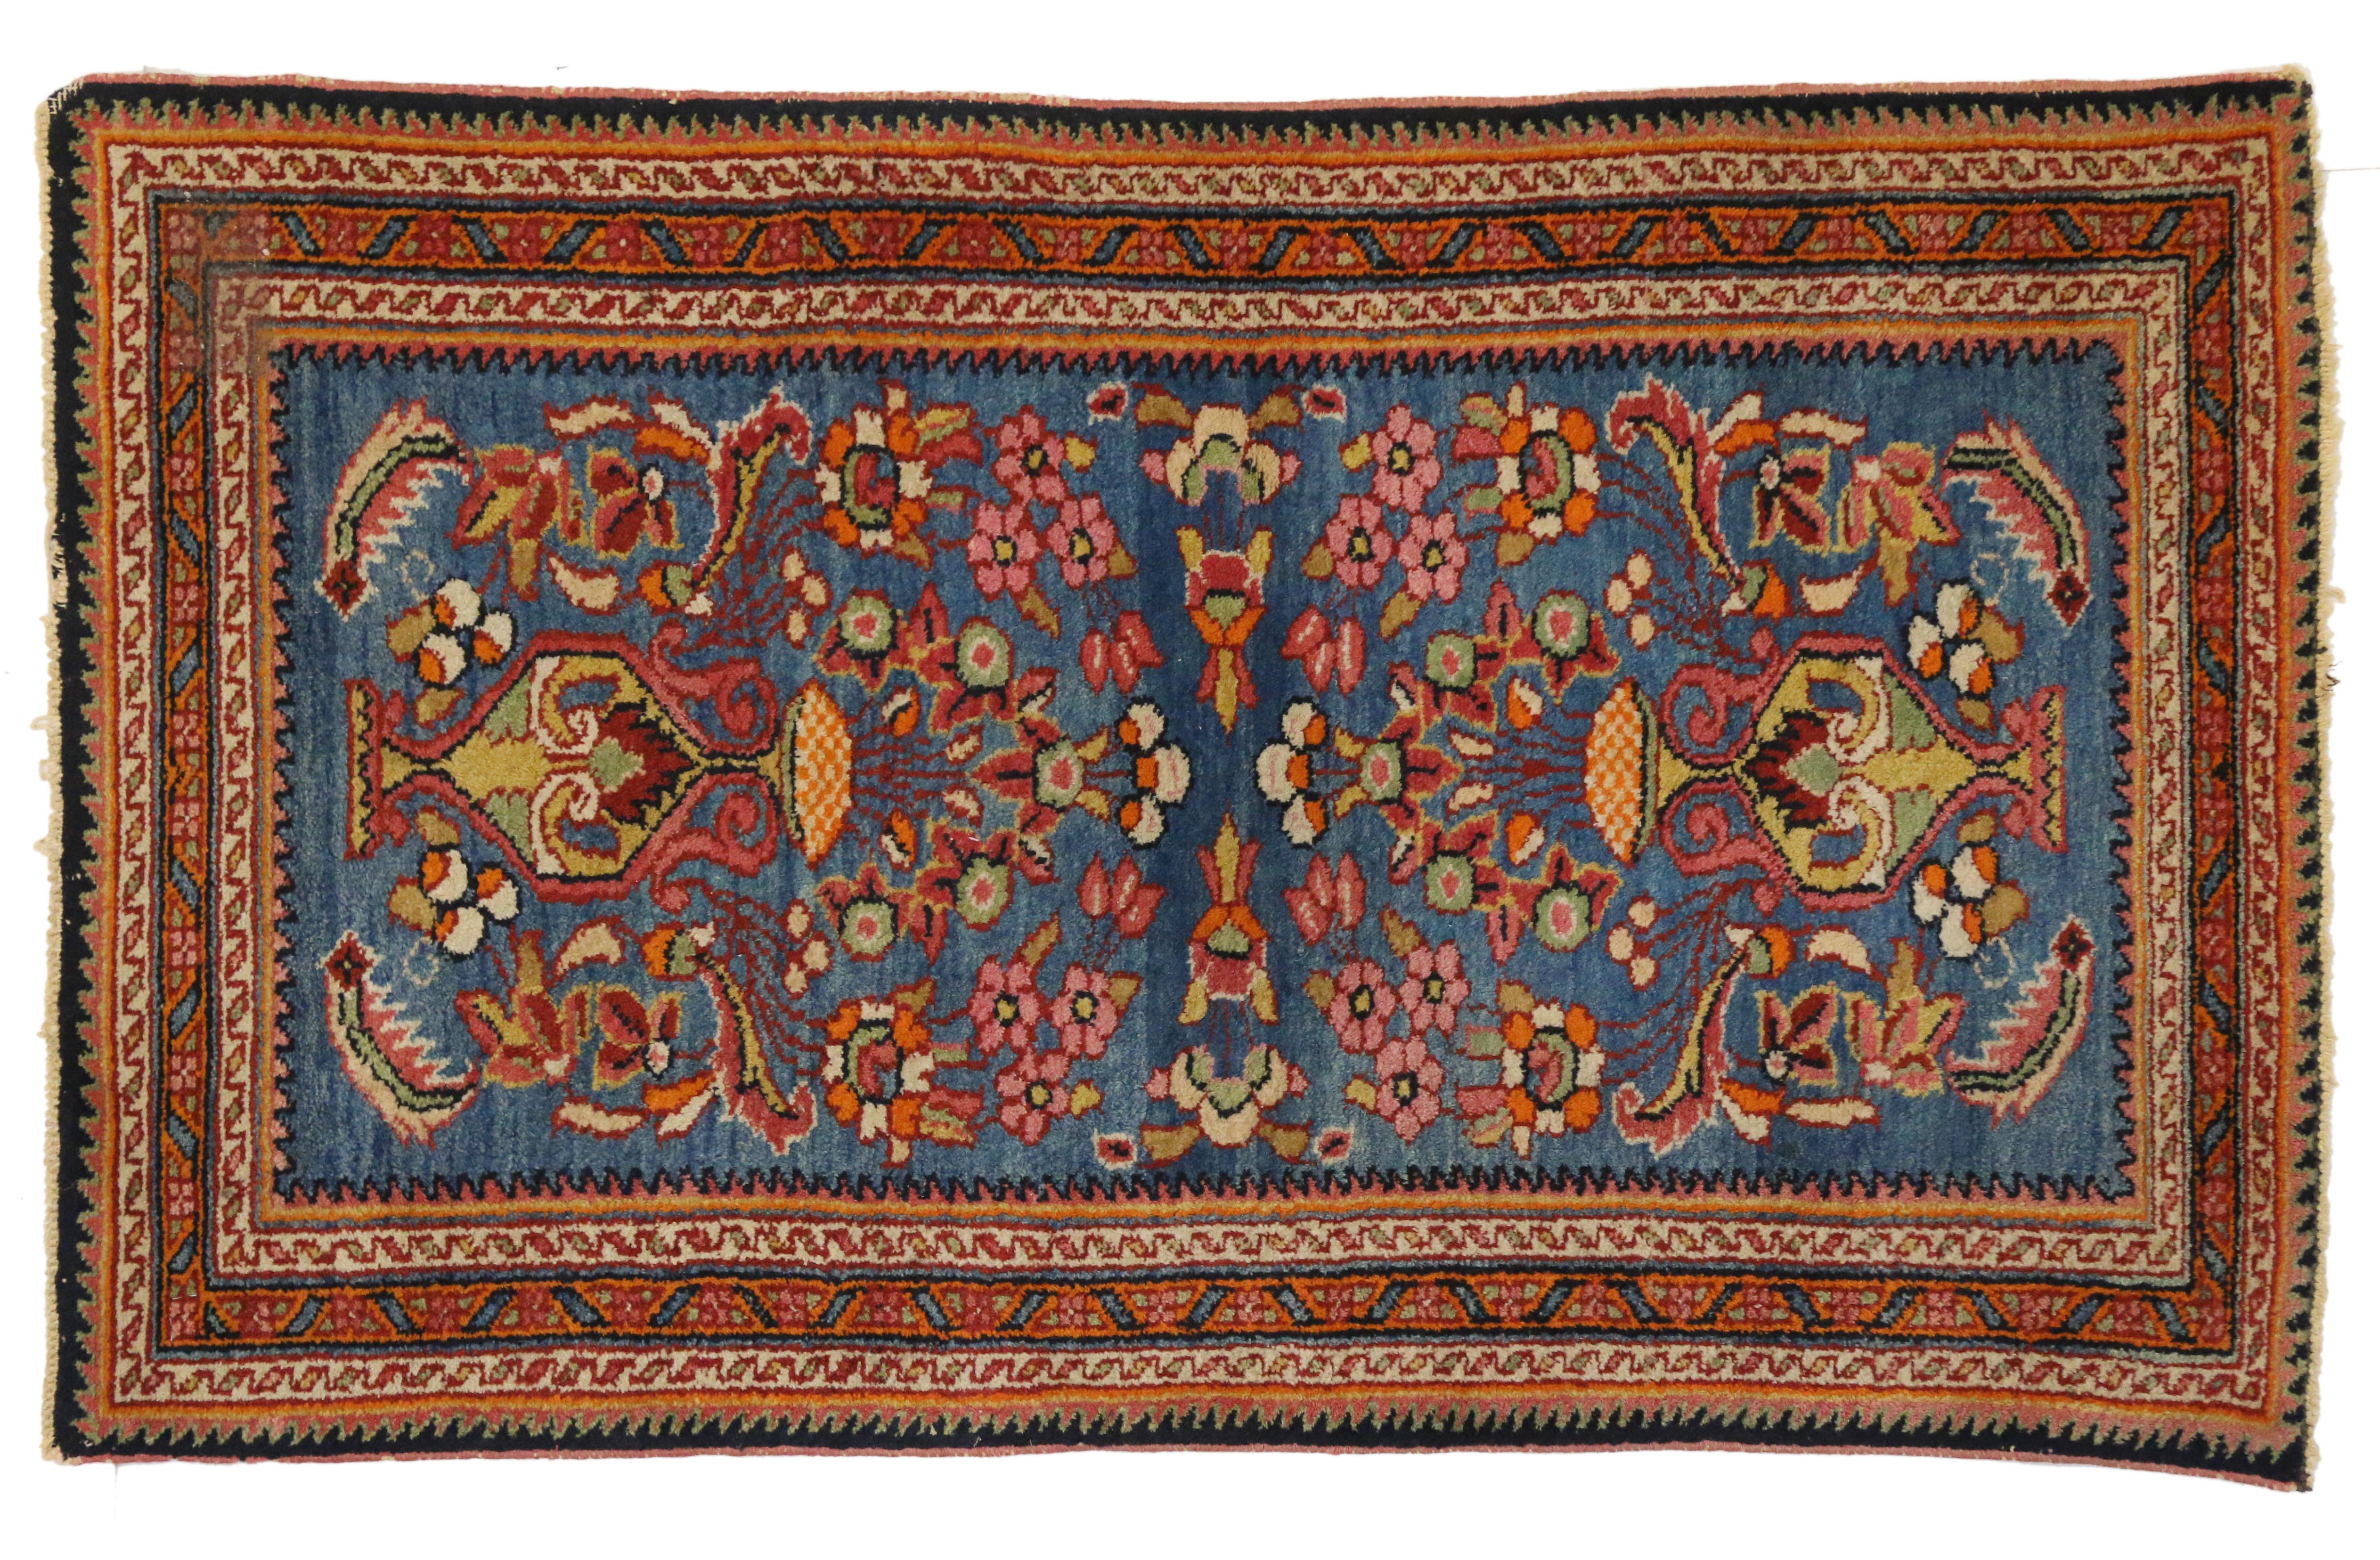 Hand-Knotted Antique Persian Lilihan Rug with Vase Motif